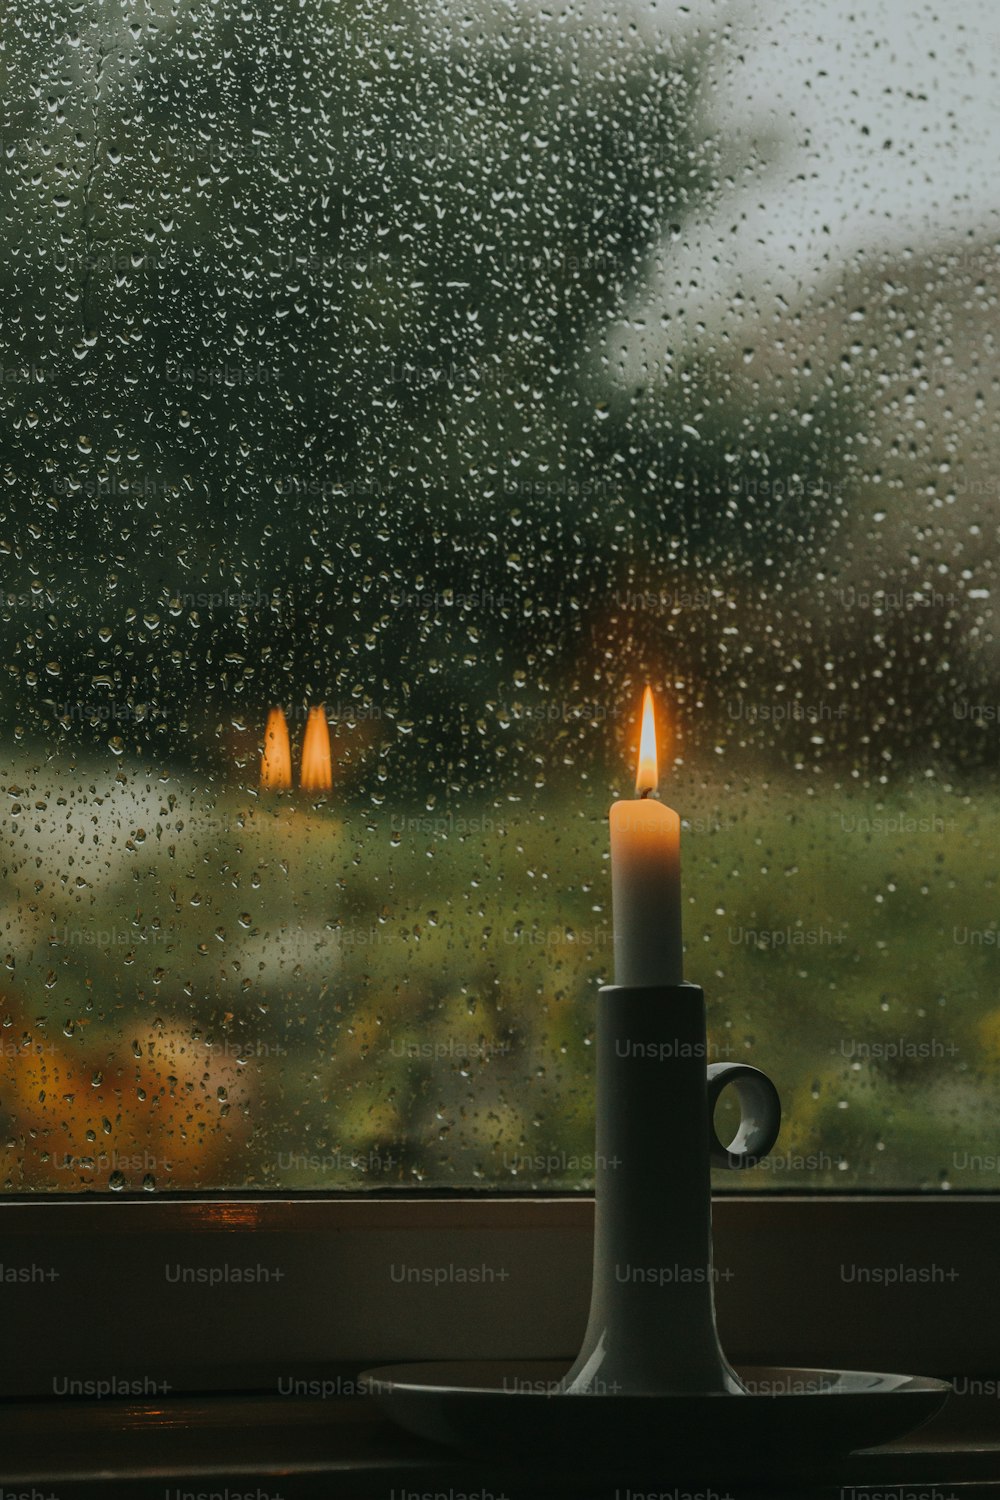 350+ Rainy Day Pictures [HQ] | Download Free Images & Stock Photos